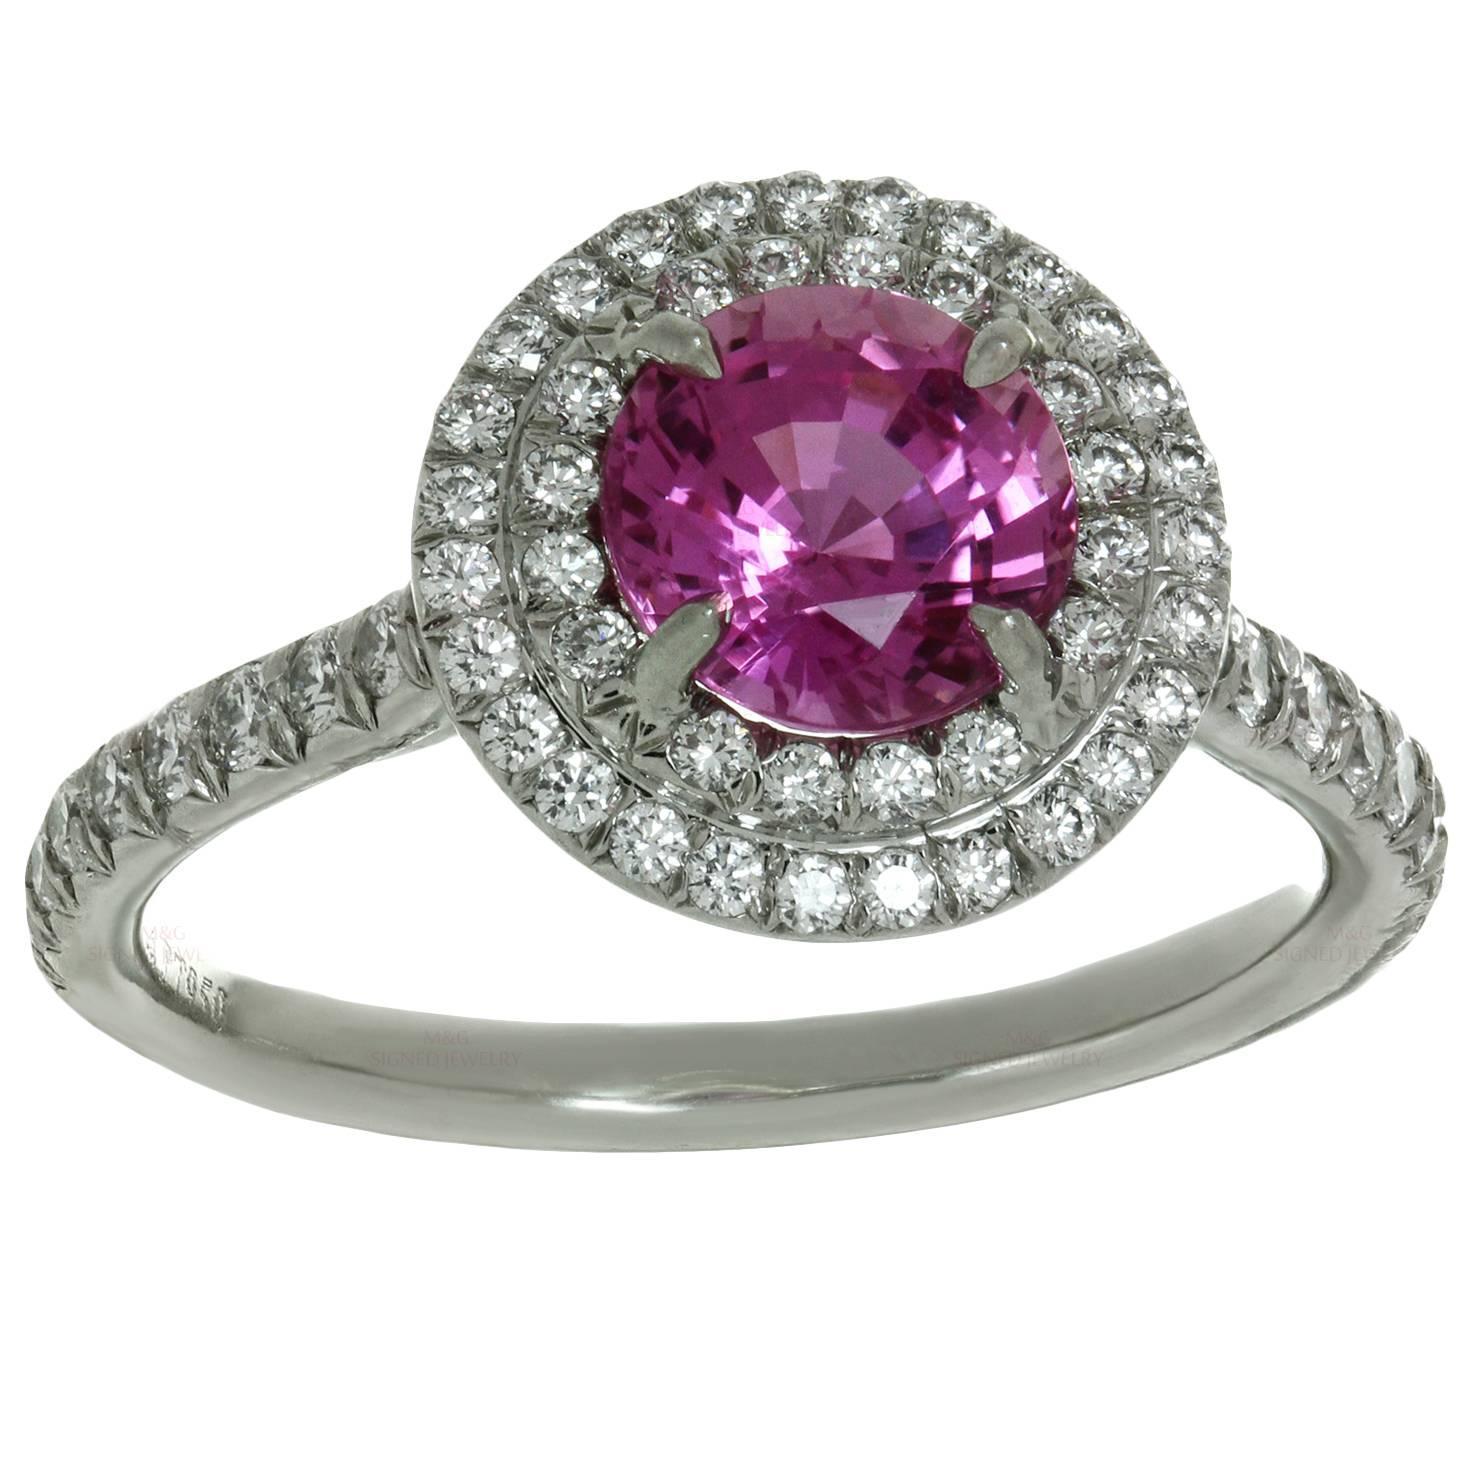 Tiffany and Co. Soleste Pink Sapphire Diamond Platinum Ring For Sale at